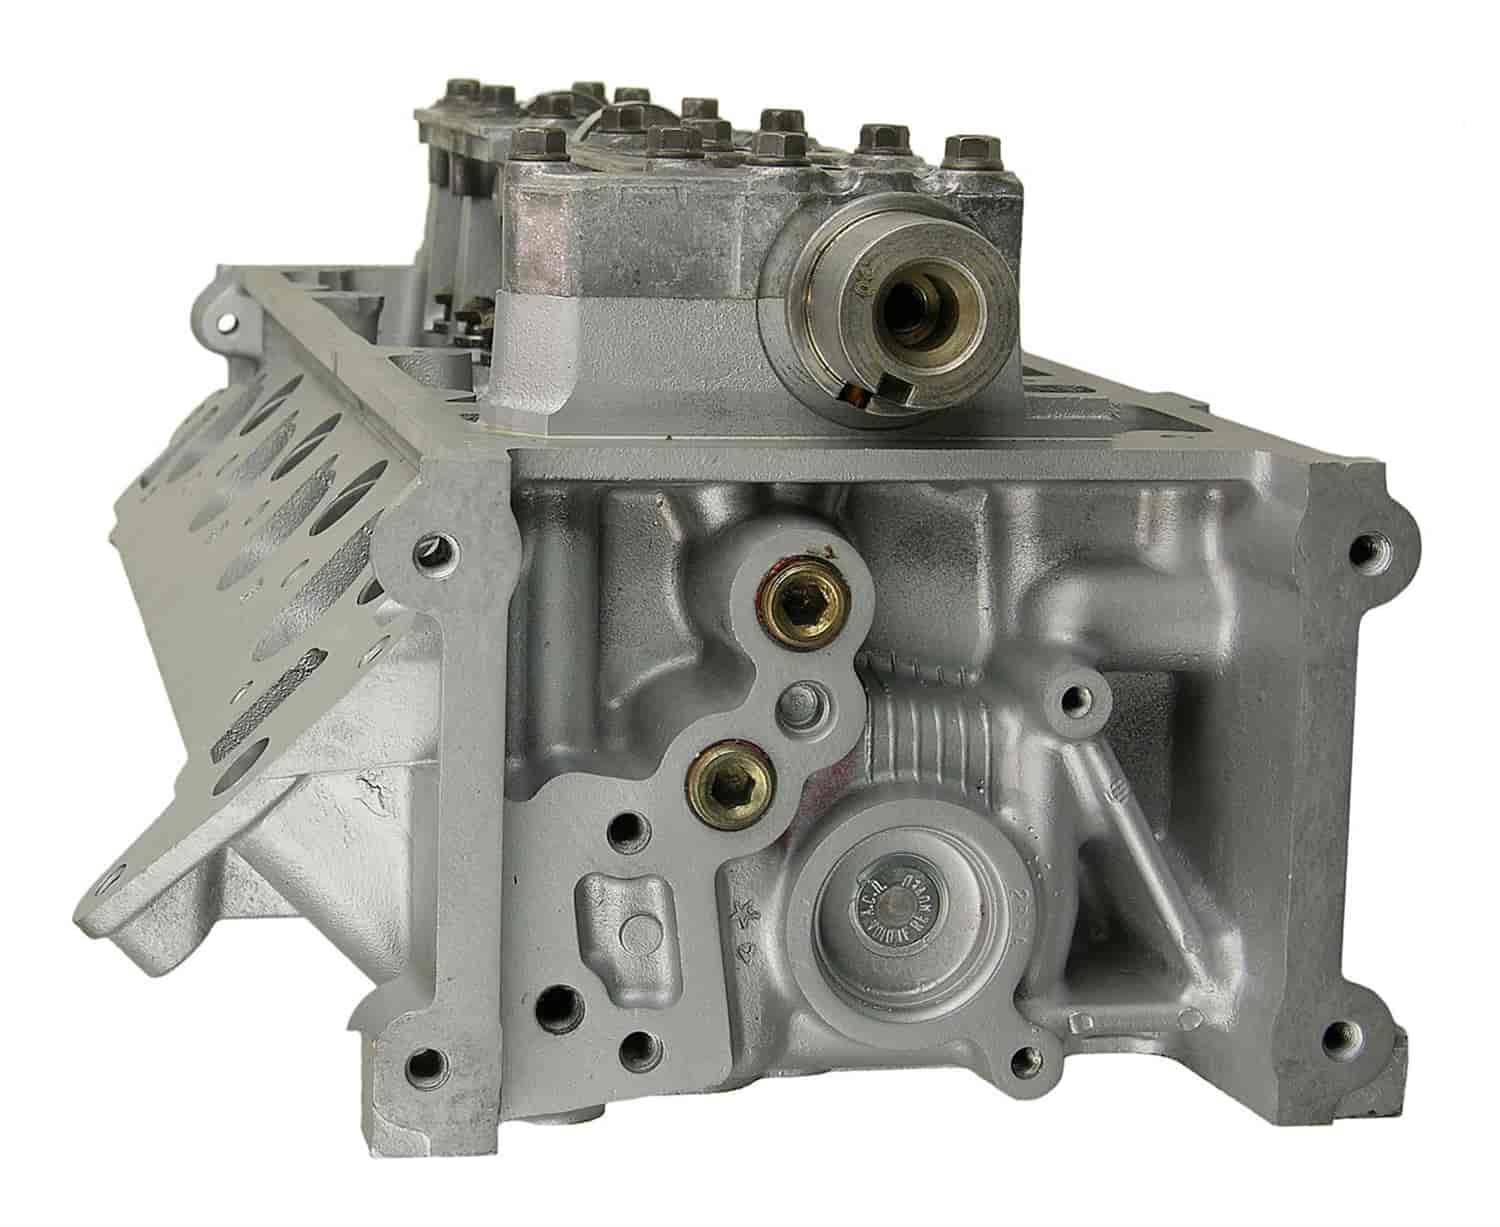 Remanufactured Cylinder Head for 1995-2000 Ford/Lincoln/Mercury with 4.6L V8